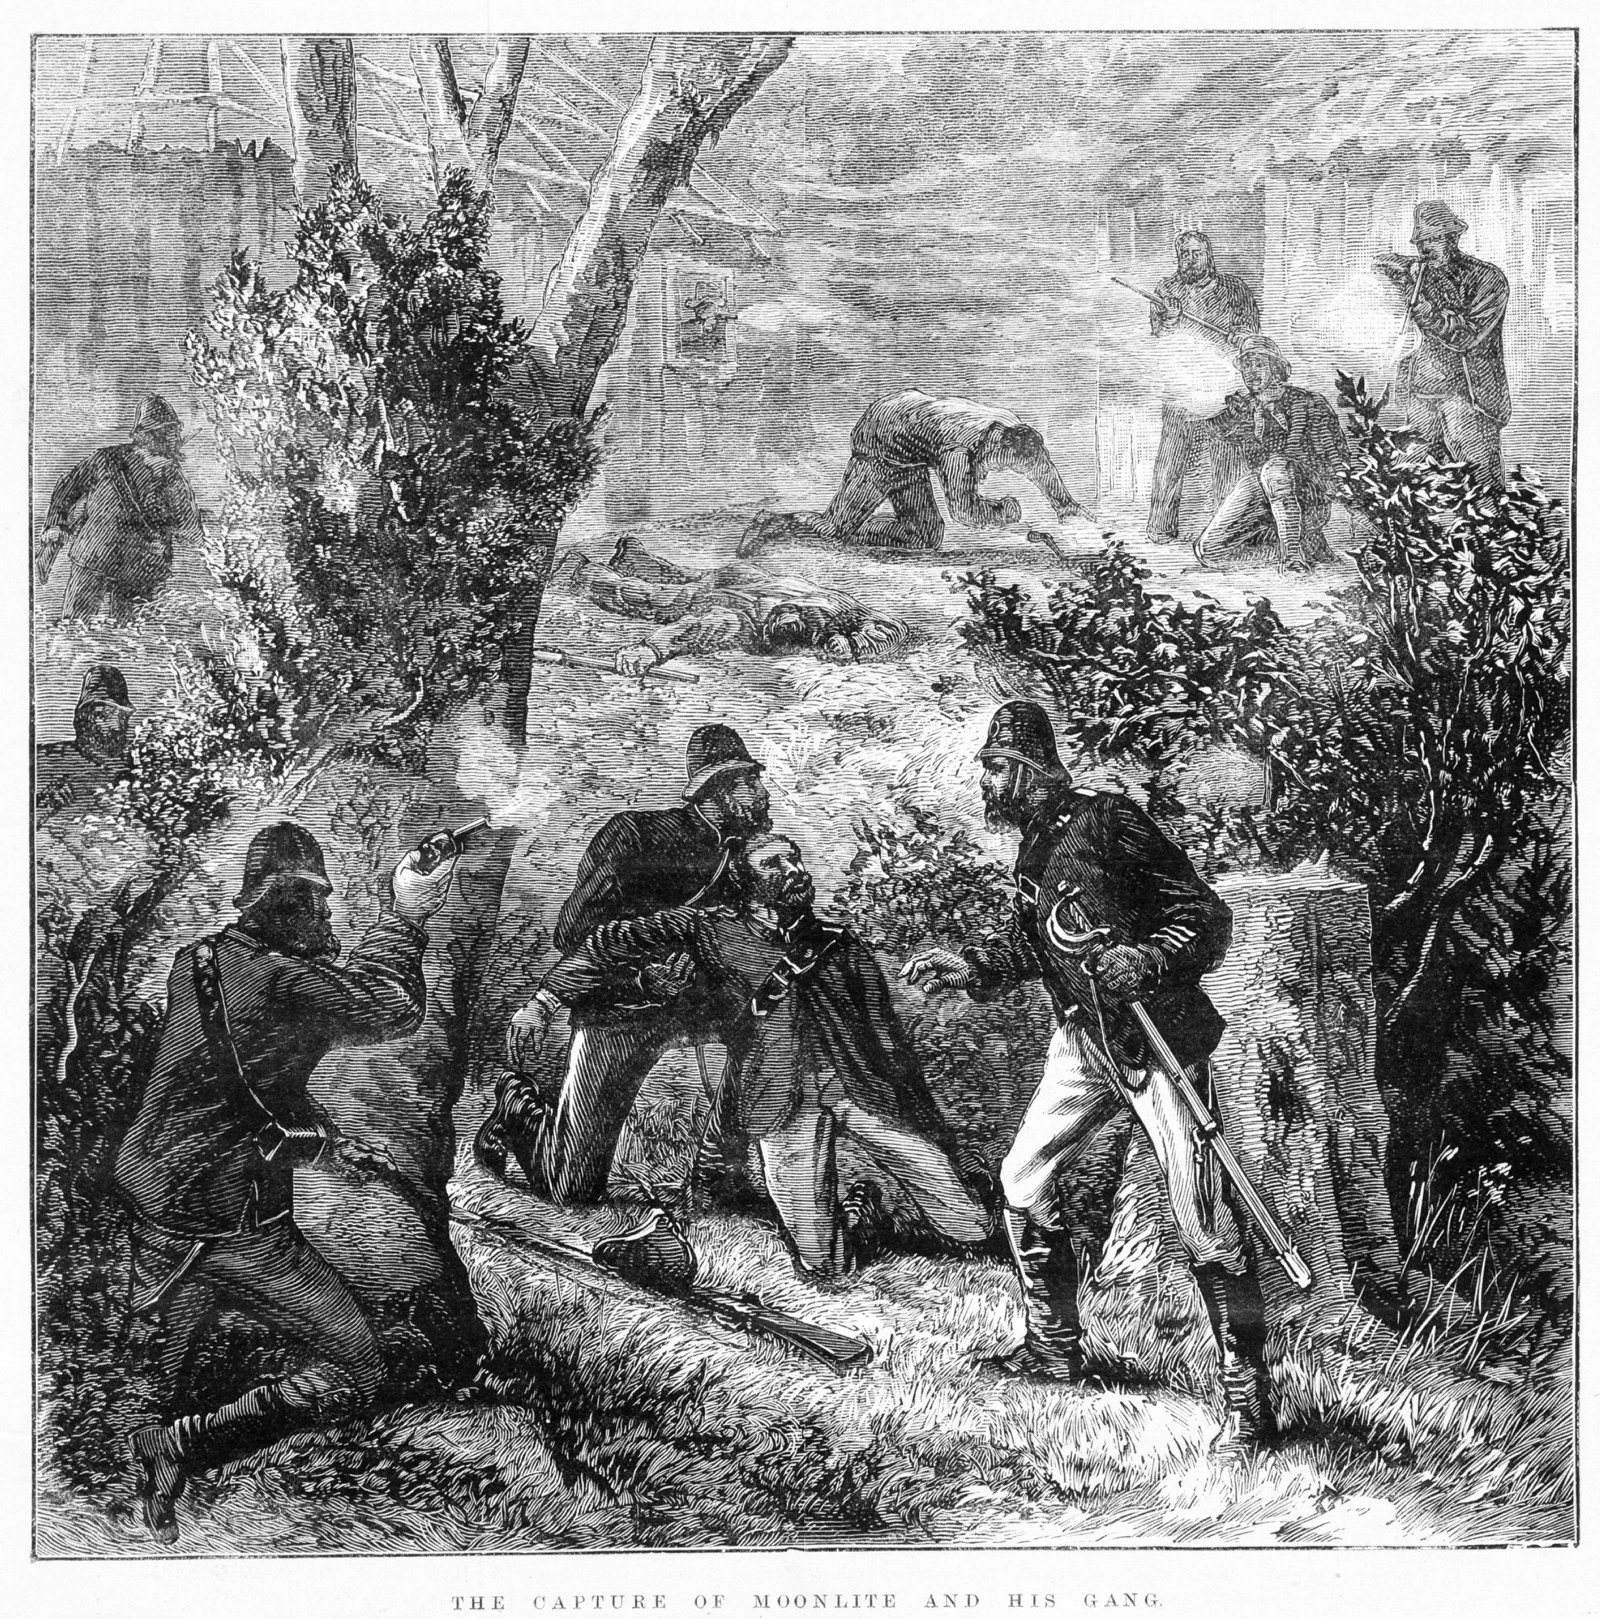 The capture of Moonlite and his gang